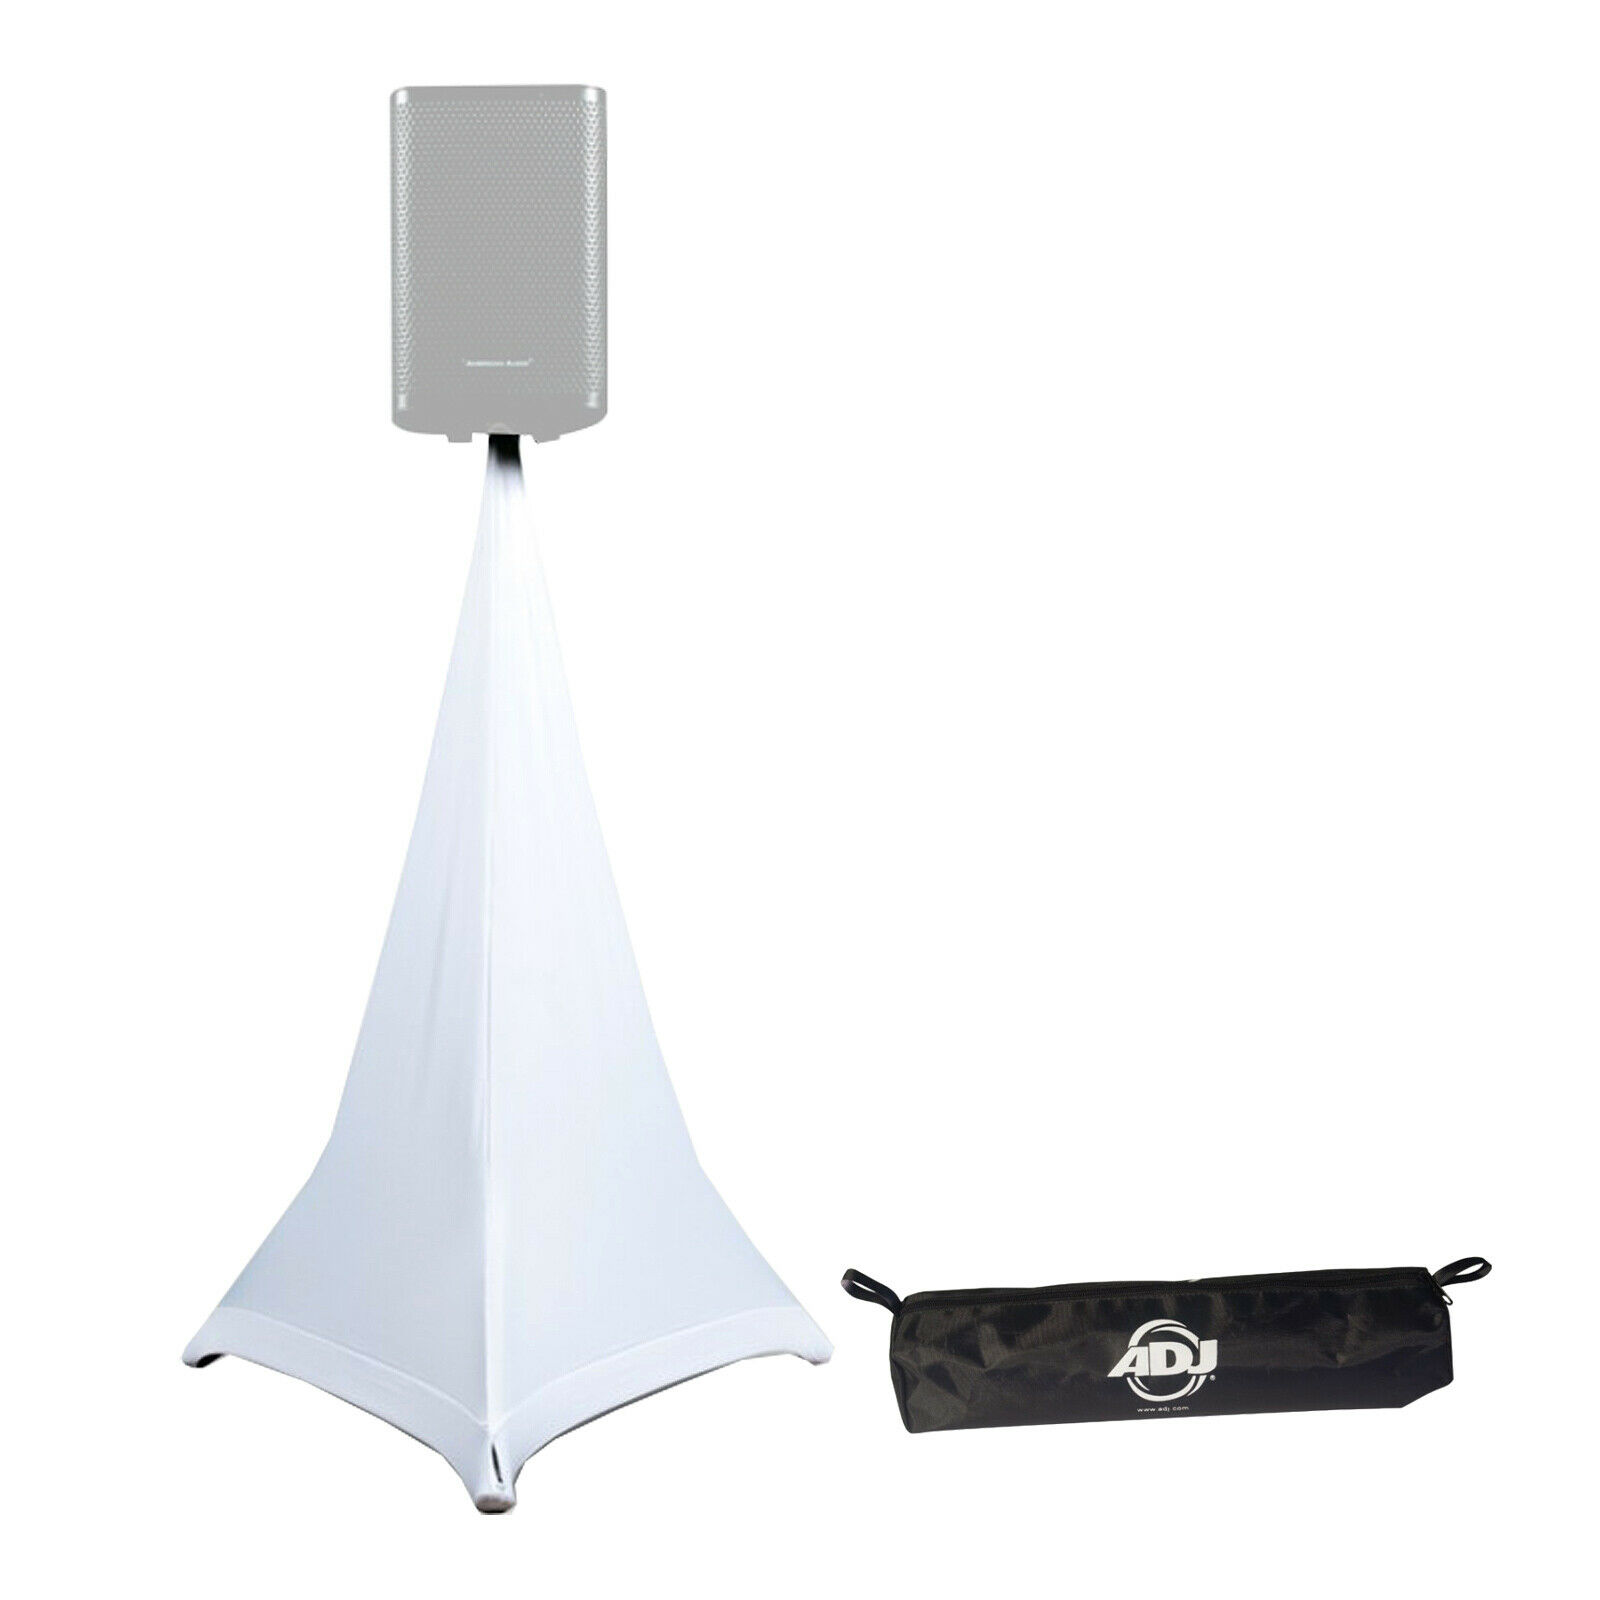 Adj Event Stand Scrim 2w 5ft Double Sided White Speaker Stand Scrim Used